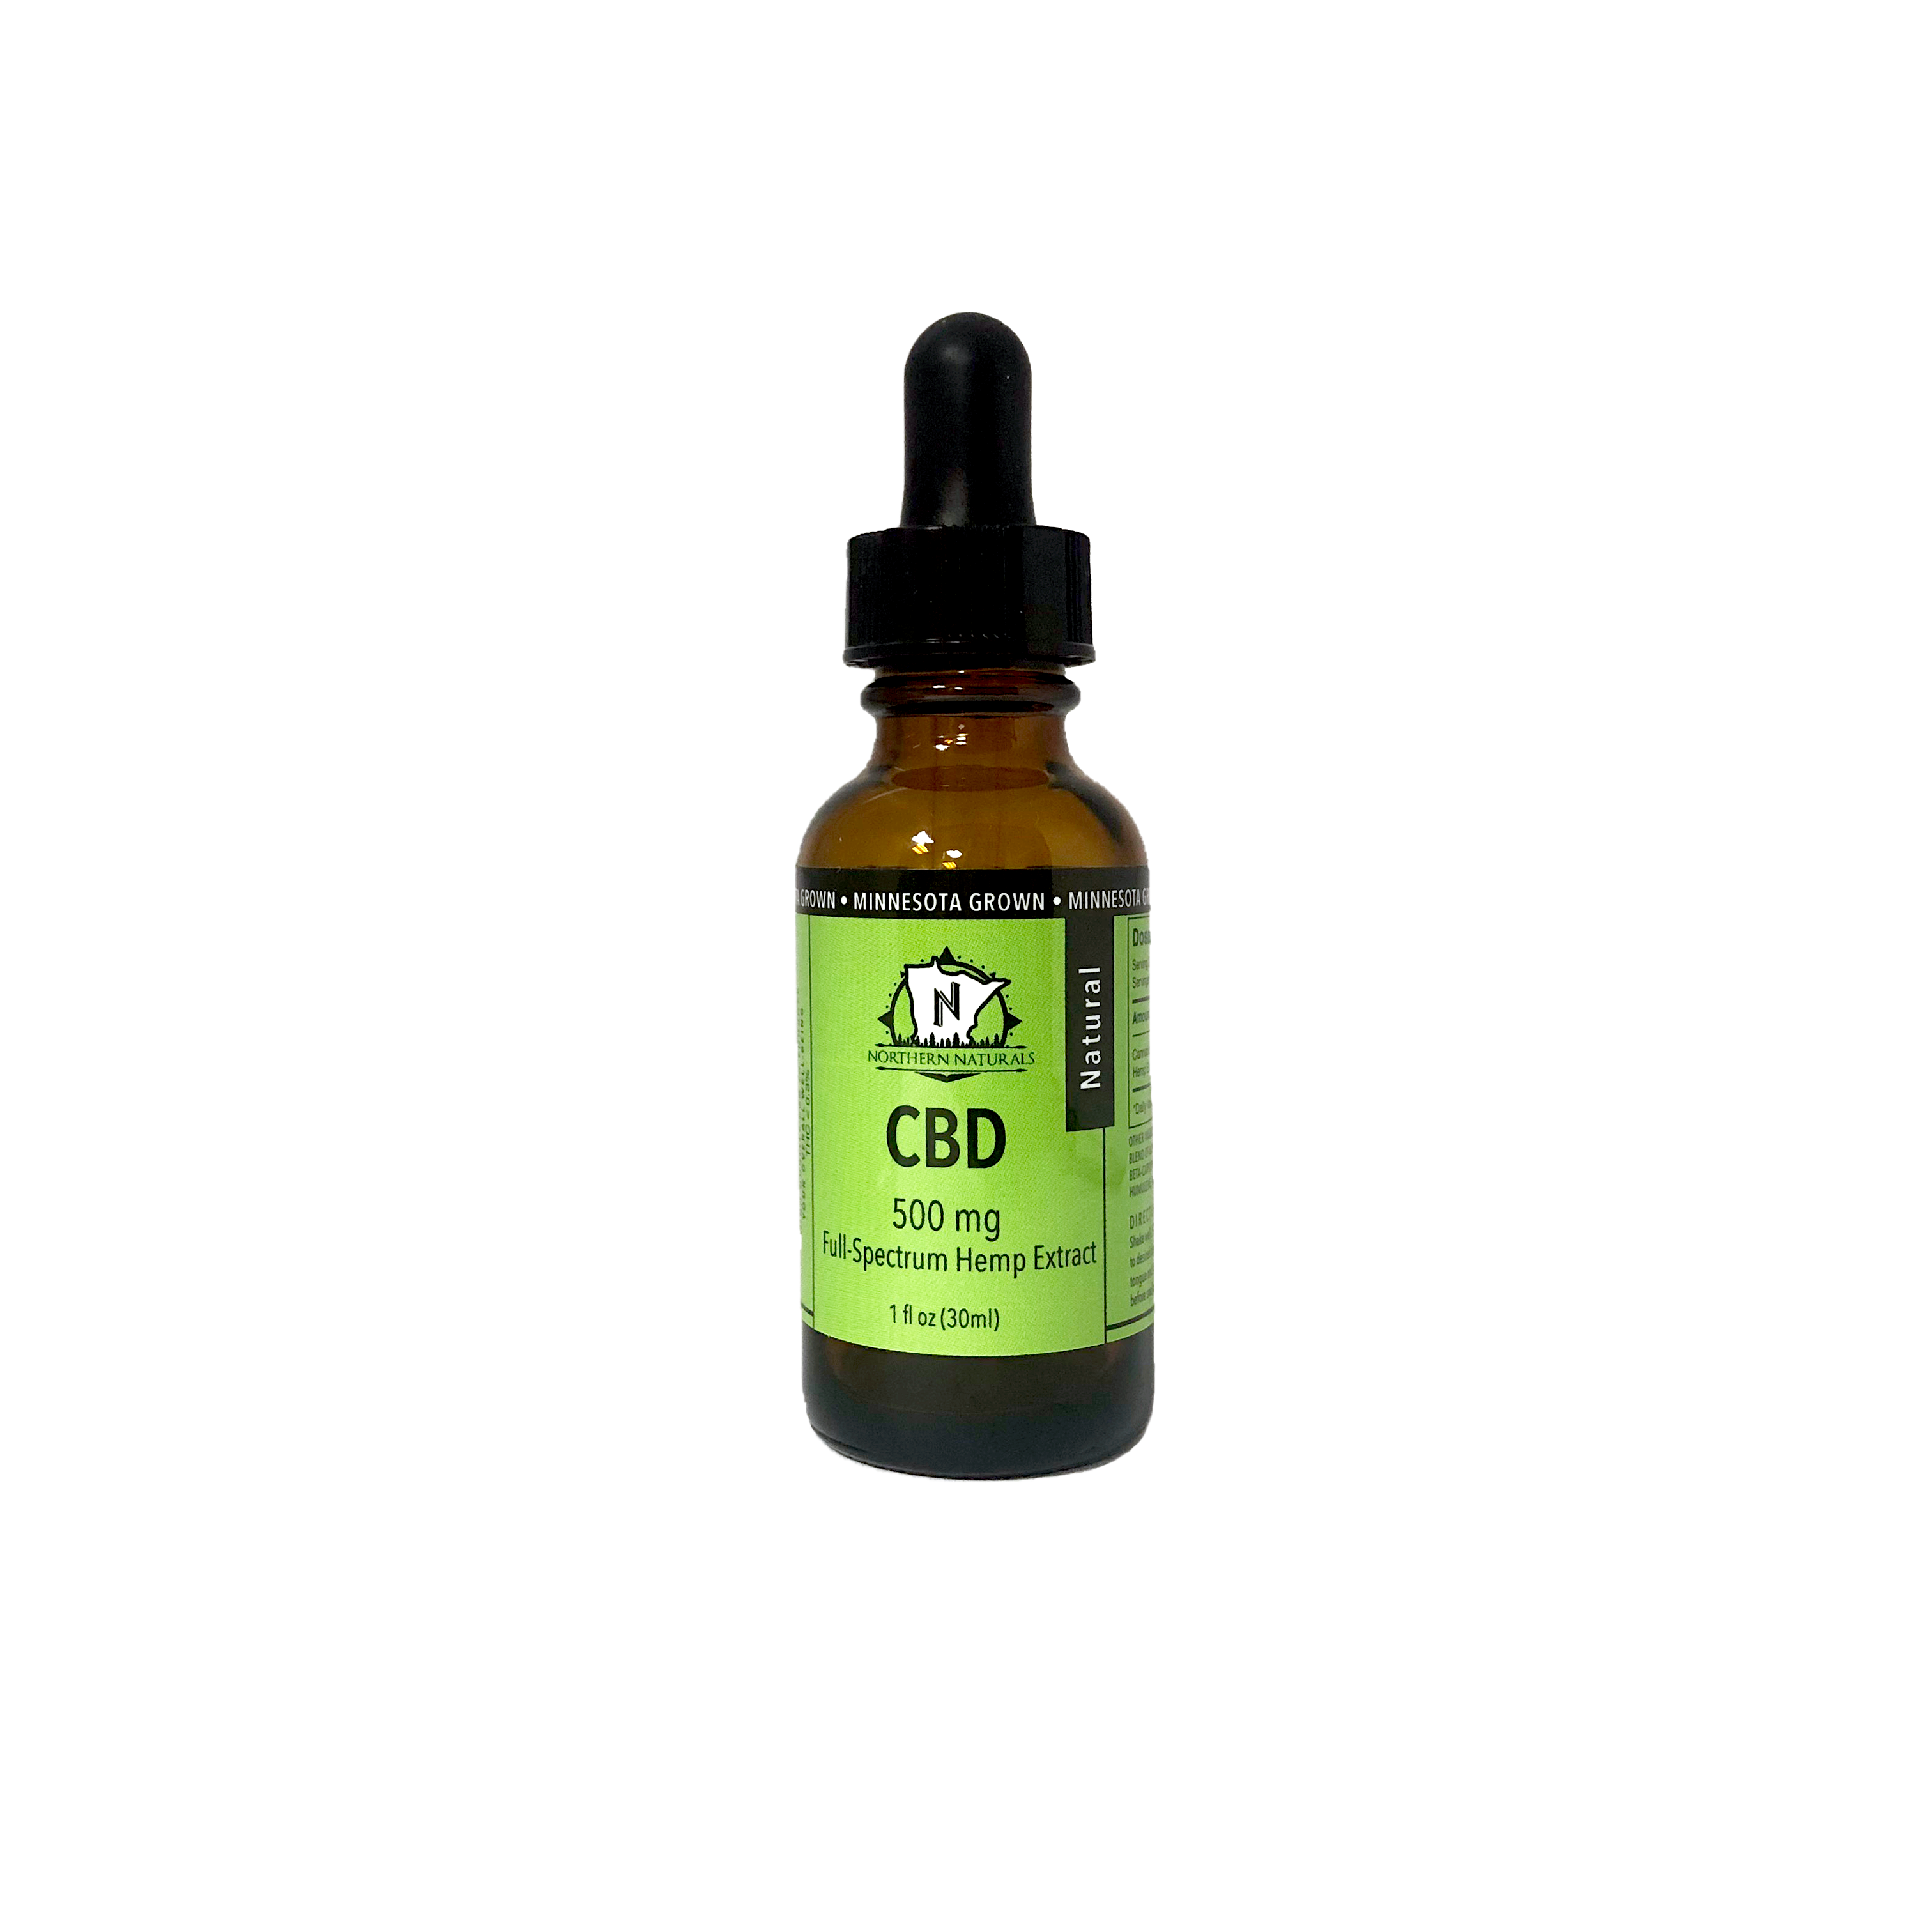 All Natural CBD Oil Grown in MN